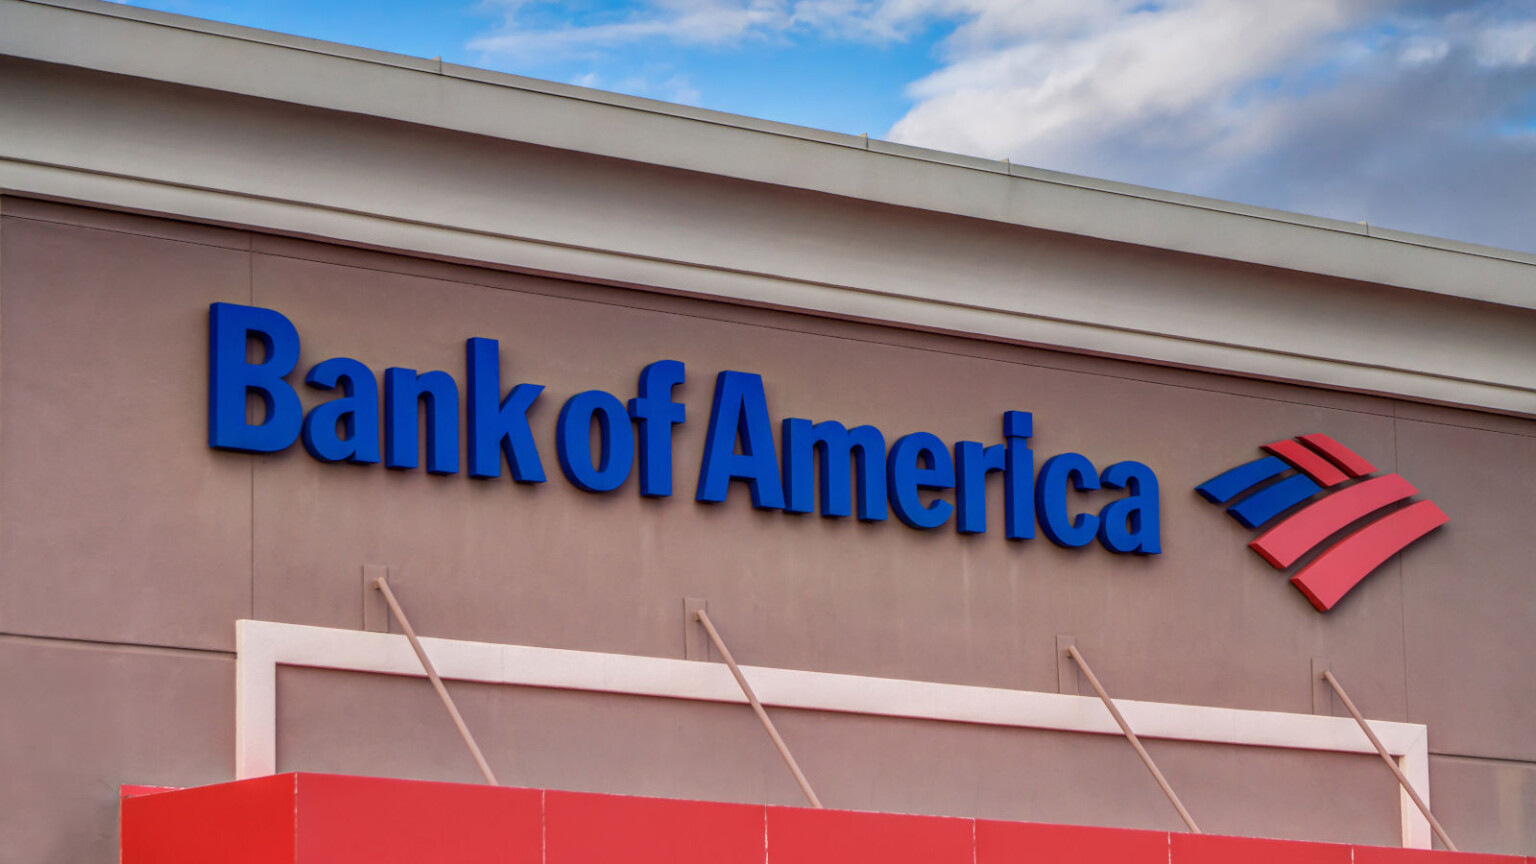 Bank Of America Leaving Country: What Does it Mean for the Economy?